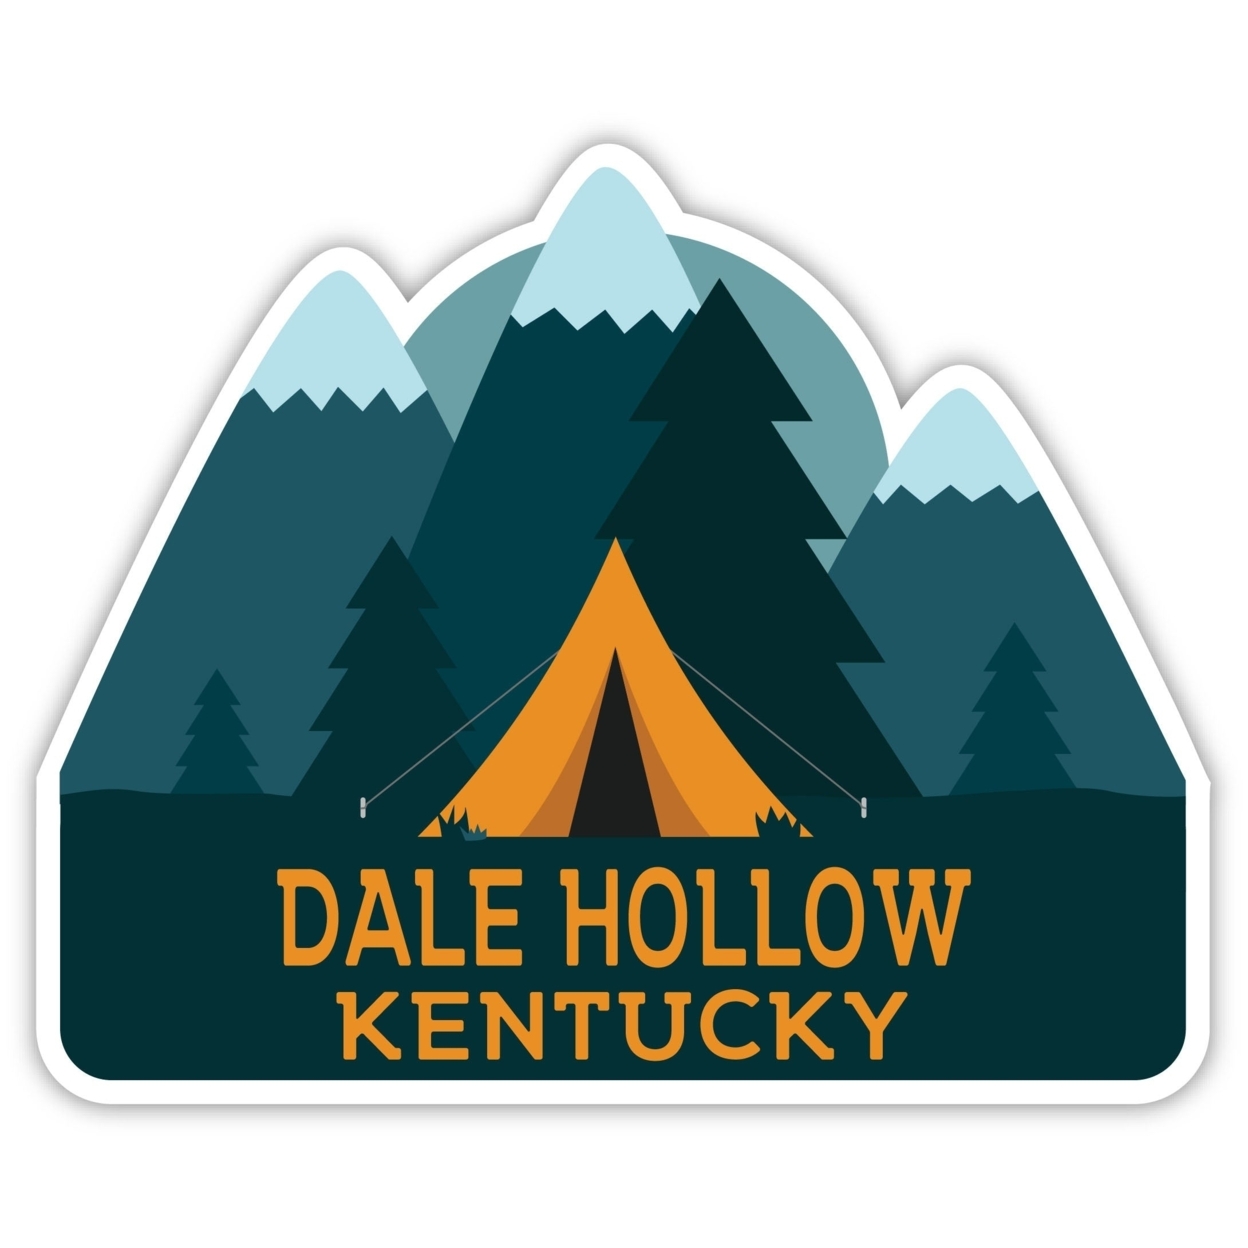 Dale Hollow Kentucky Souvenir Decorative Stickers (Choose Theme And Size) - 4-Pack, 2-Inch, Tent